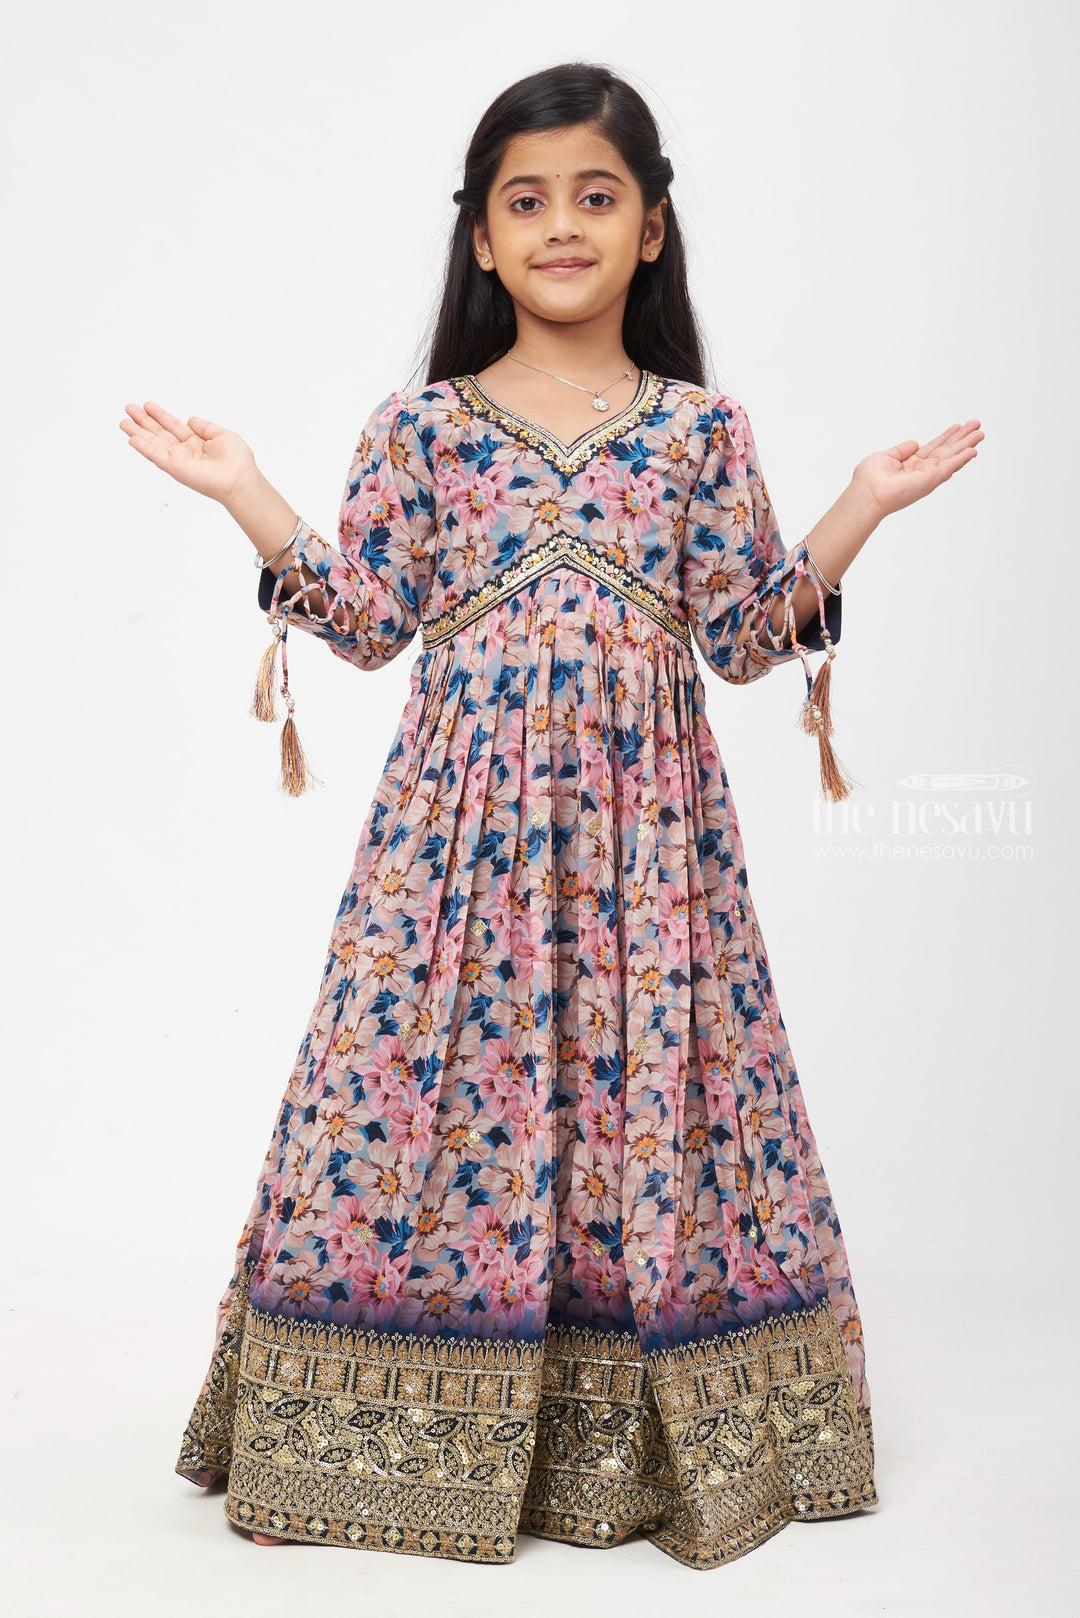 The Nesavu Girls Party Gown Ethereal Floral Diwali Anarkali Gown with Exquisite Sequin Embellishments for Girls Nesavu Pastel Floral Designer Anarkali Gown | Diwali Special Girls Festive Collection | The Nesavu